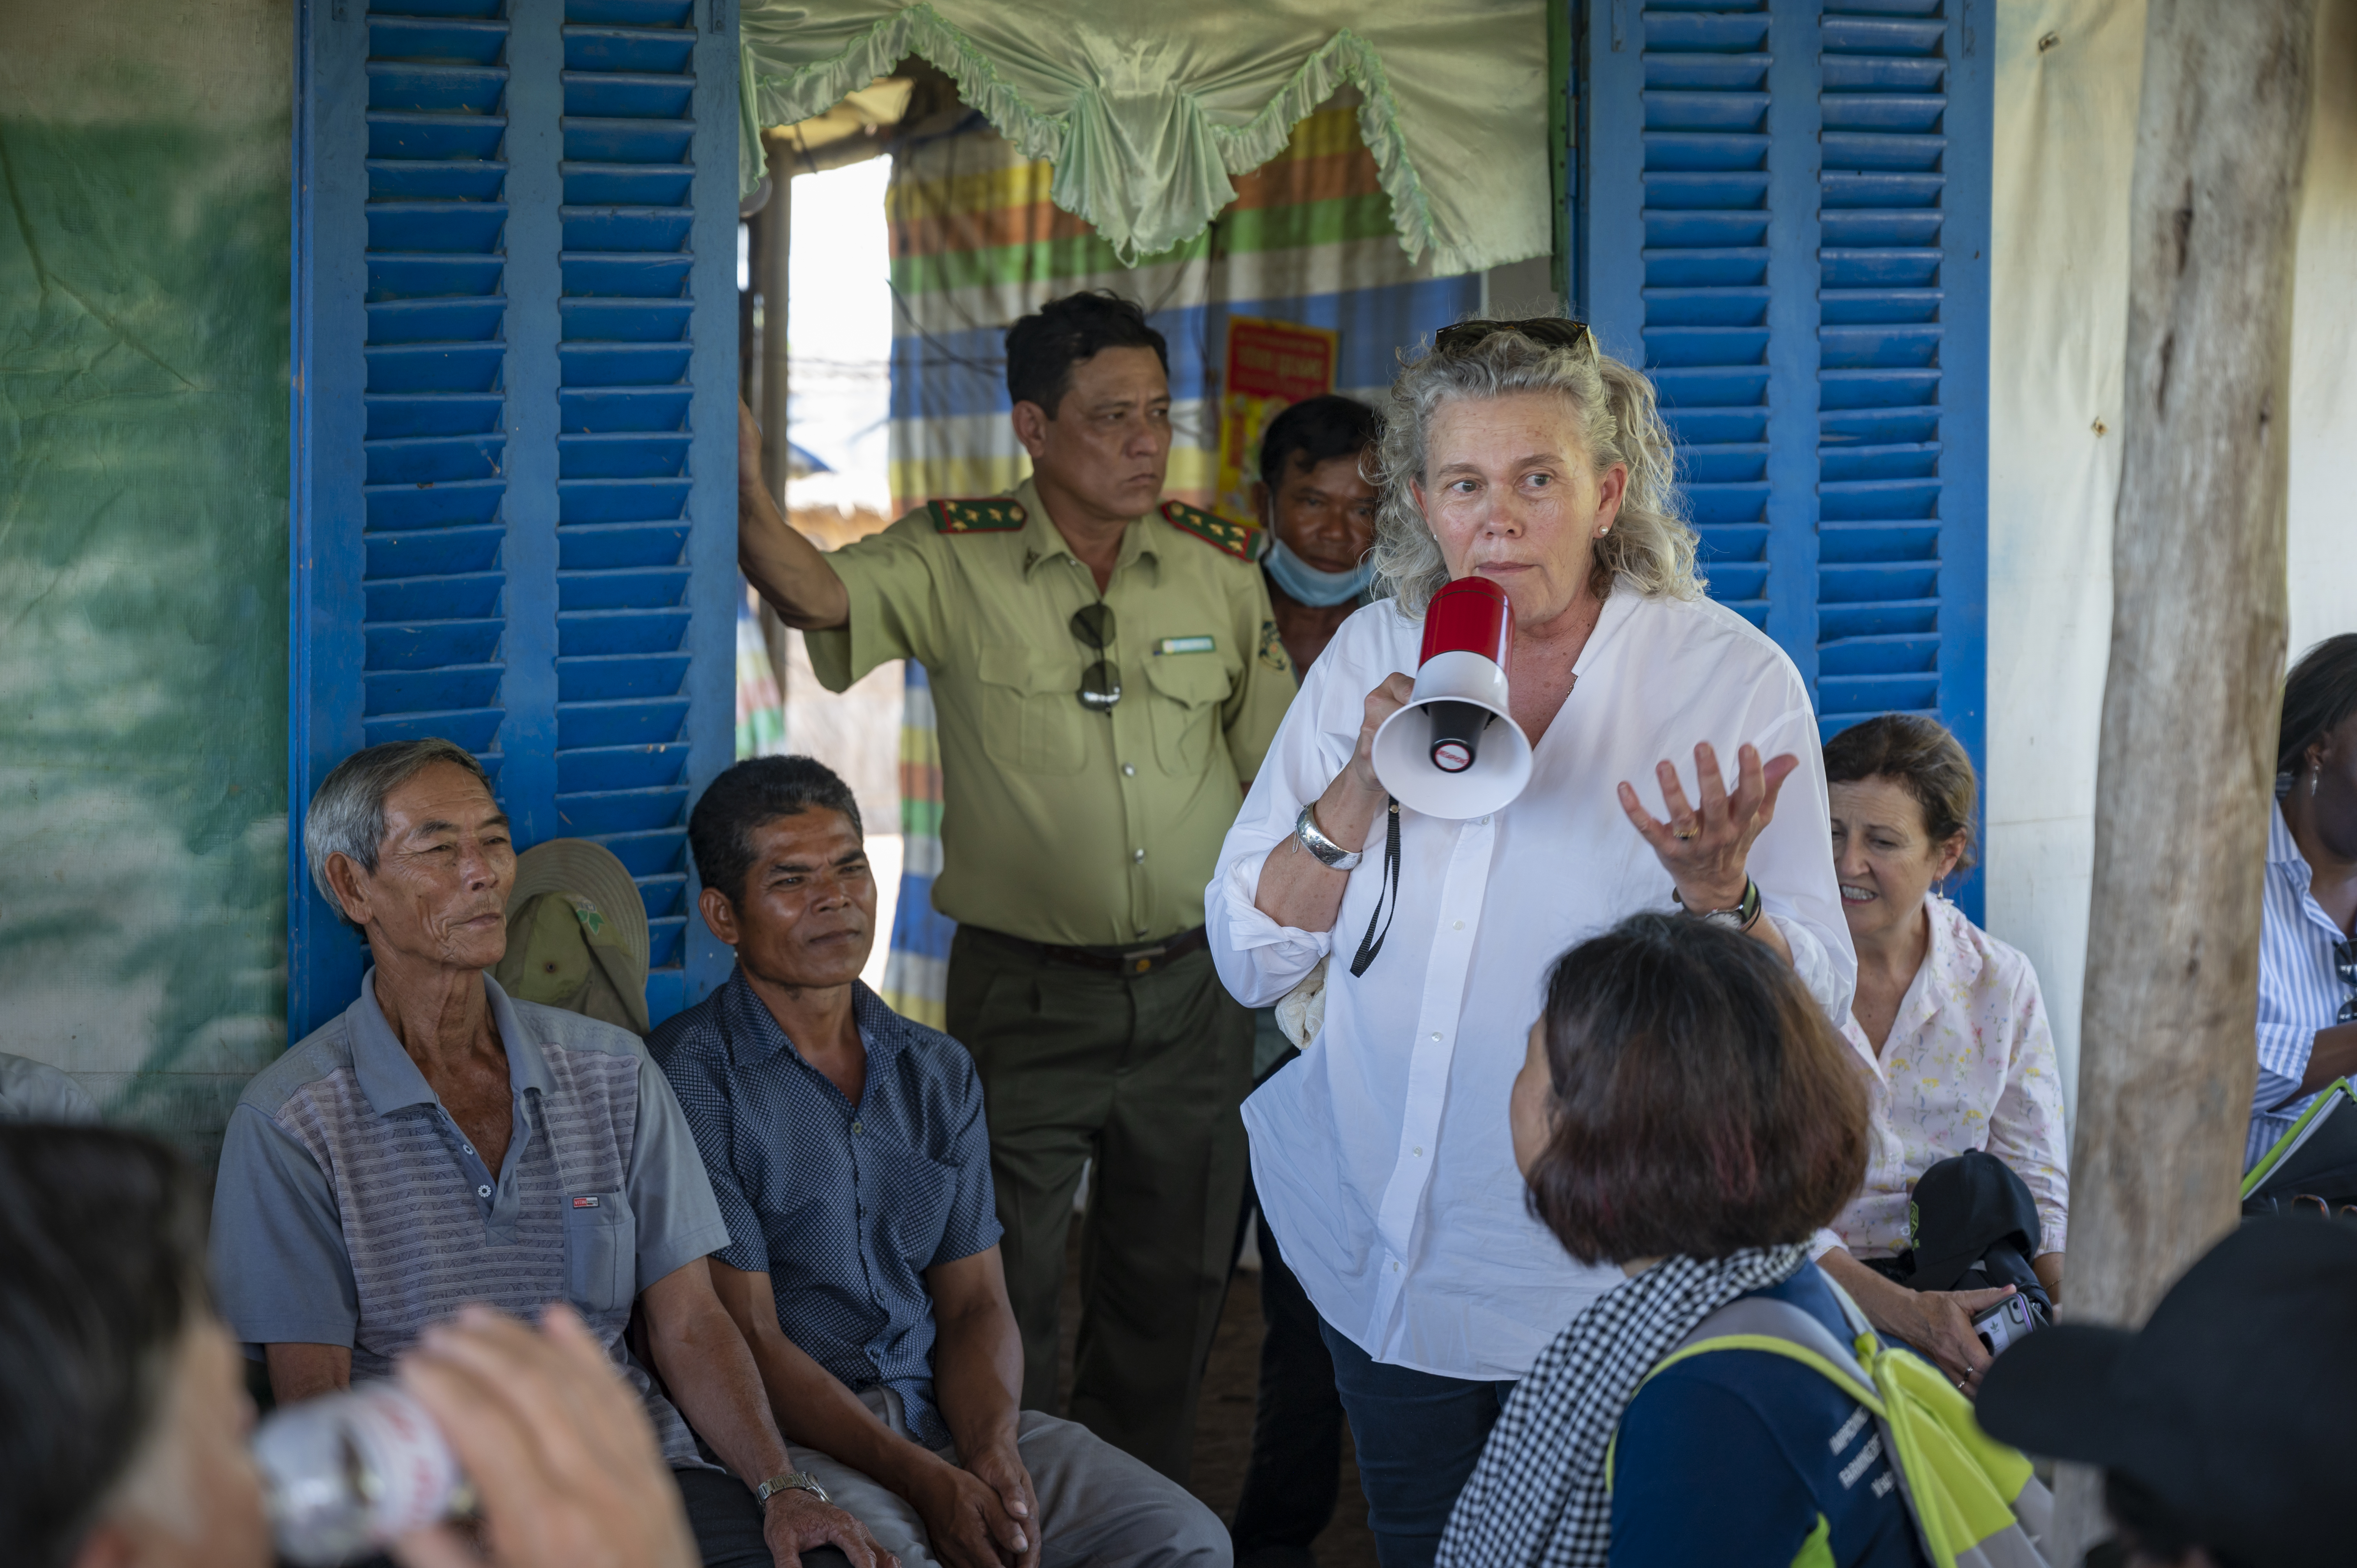 Woman speaking into speaker to a group